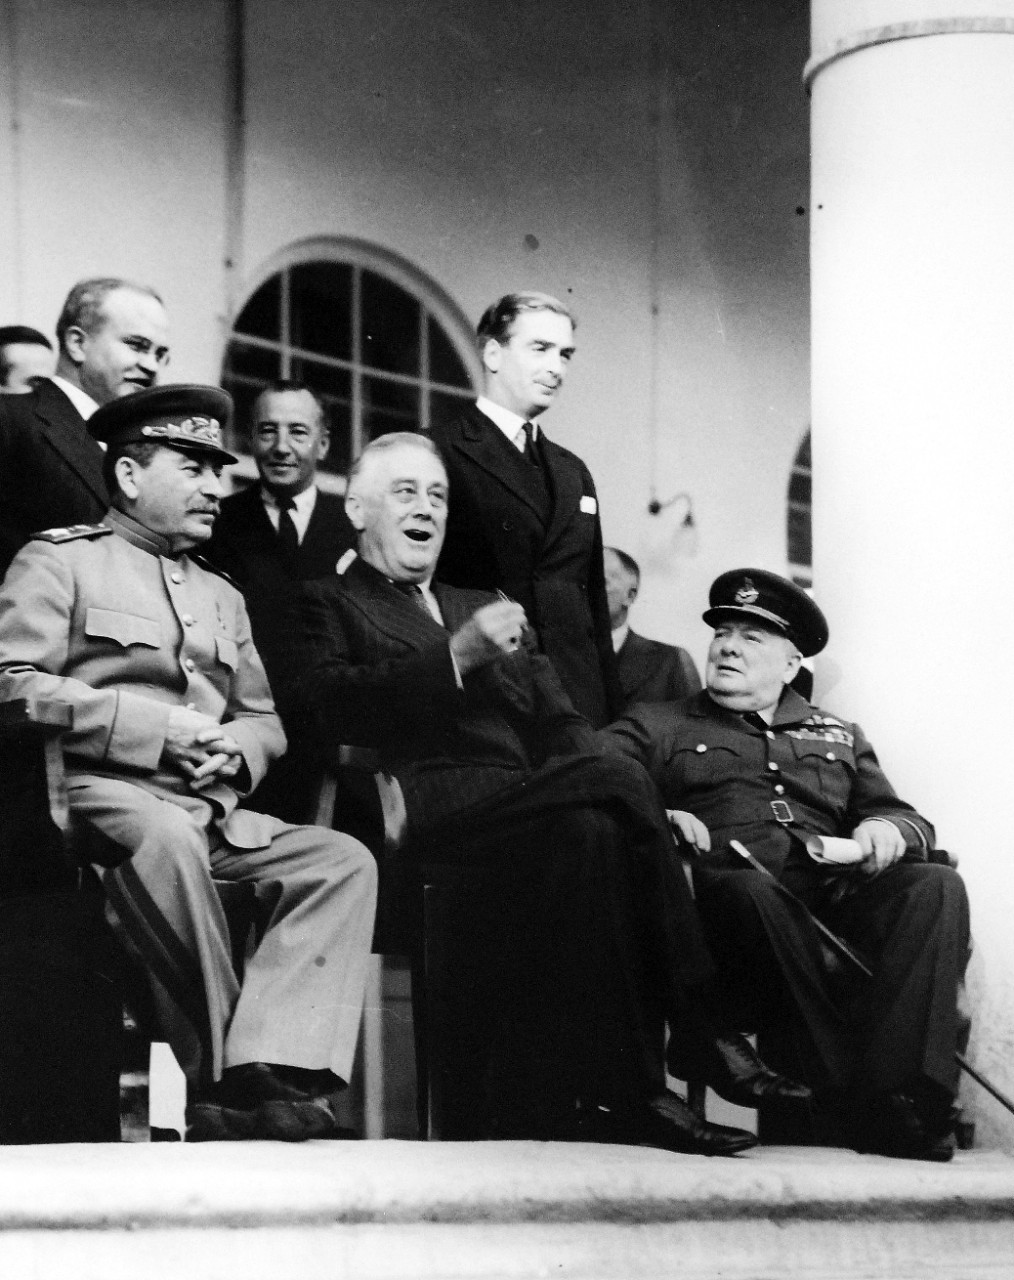 Lot 11597-5:  Tehran Conference, November-December 1943.   The strategy meeting of Premier Joseph Stalin, President Franklin D. Roosevelt, and Prime Minister Winston Churchill at the Russian Embassy at Tehran, Iran.  This conference was the first of “Big Three” leaders (Soviet Union, United States and United Kingdom). Note, V. M. Molotov, Peoples’ Commissar for Foreign Affairs, to Stalin’s behind right.  U.S. Army photograph from the collection of the Office of War Information.   Courtesy of the Library of Congress.   (2016/01/15).